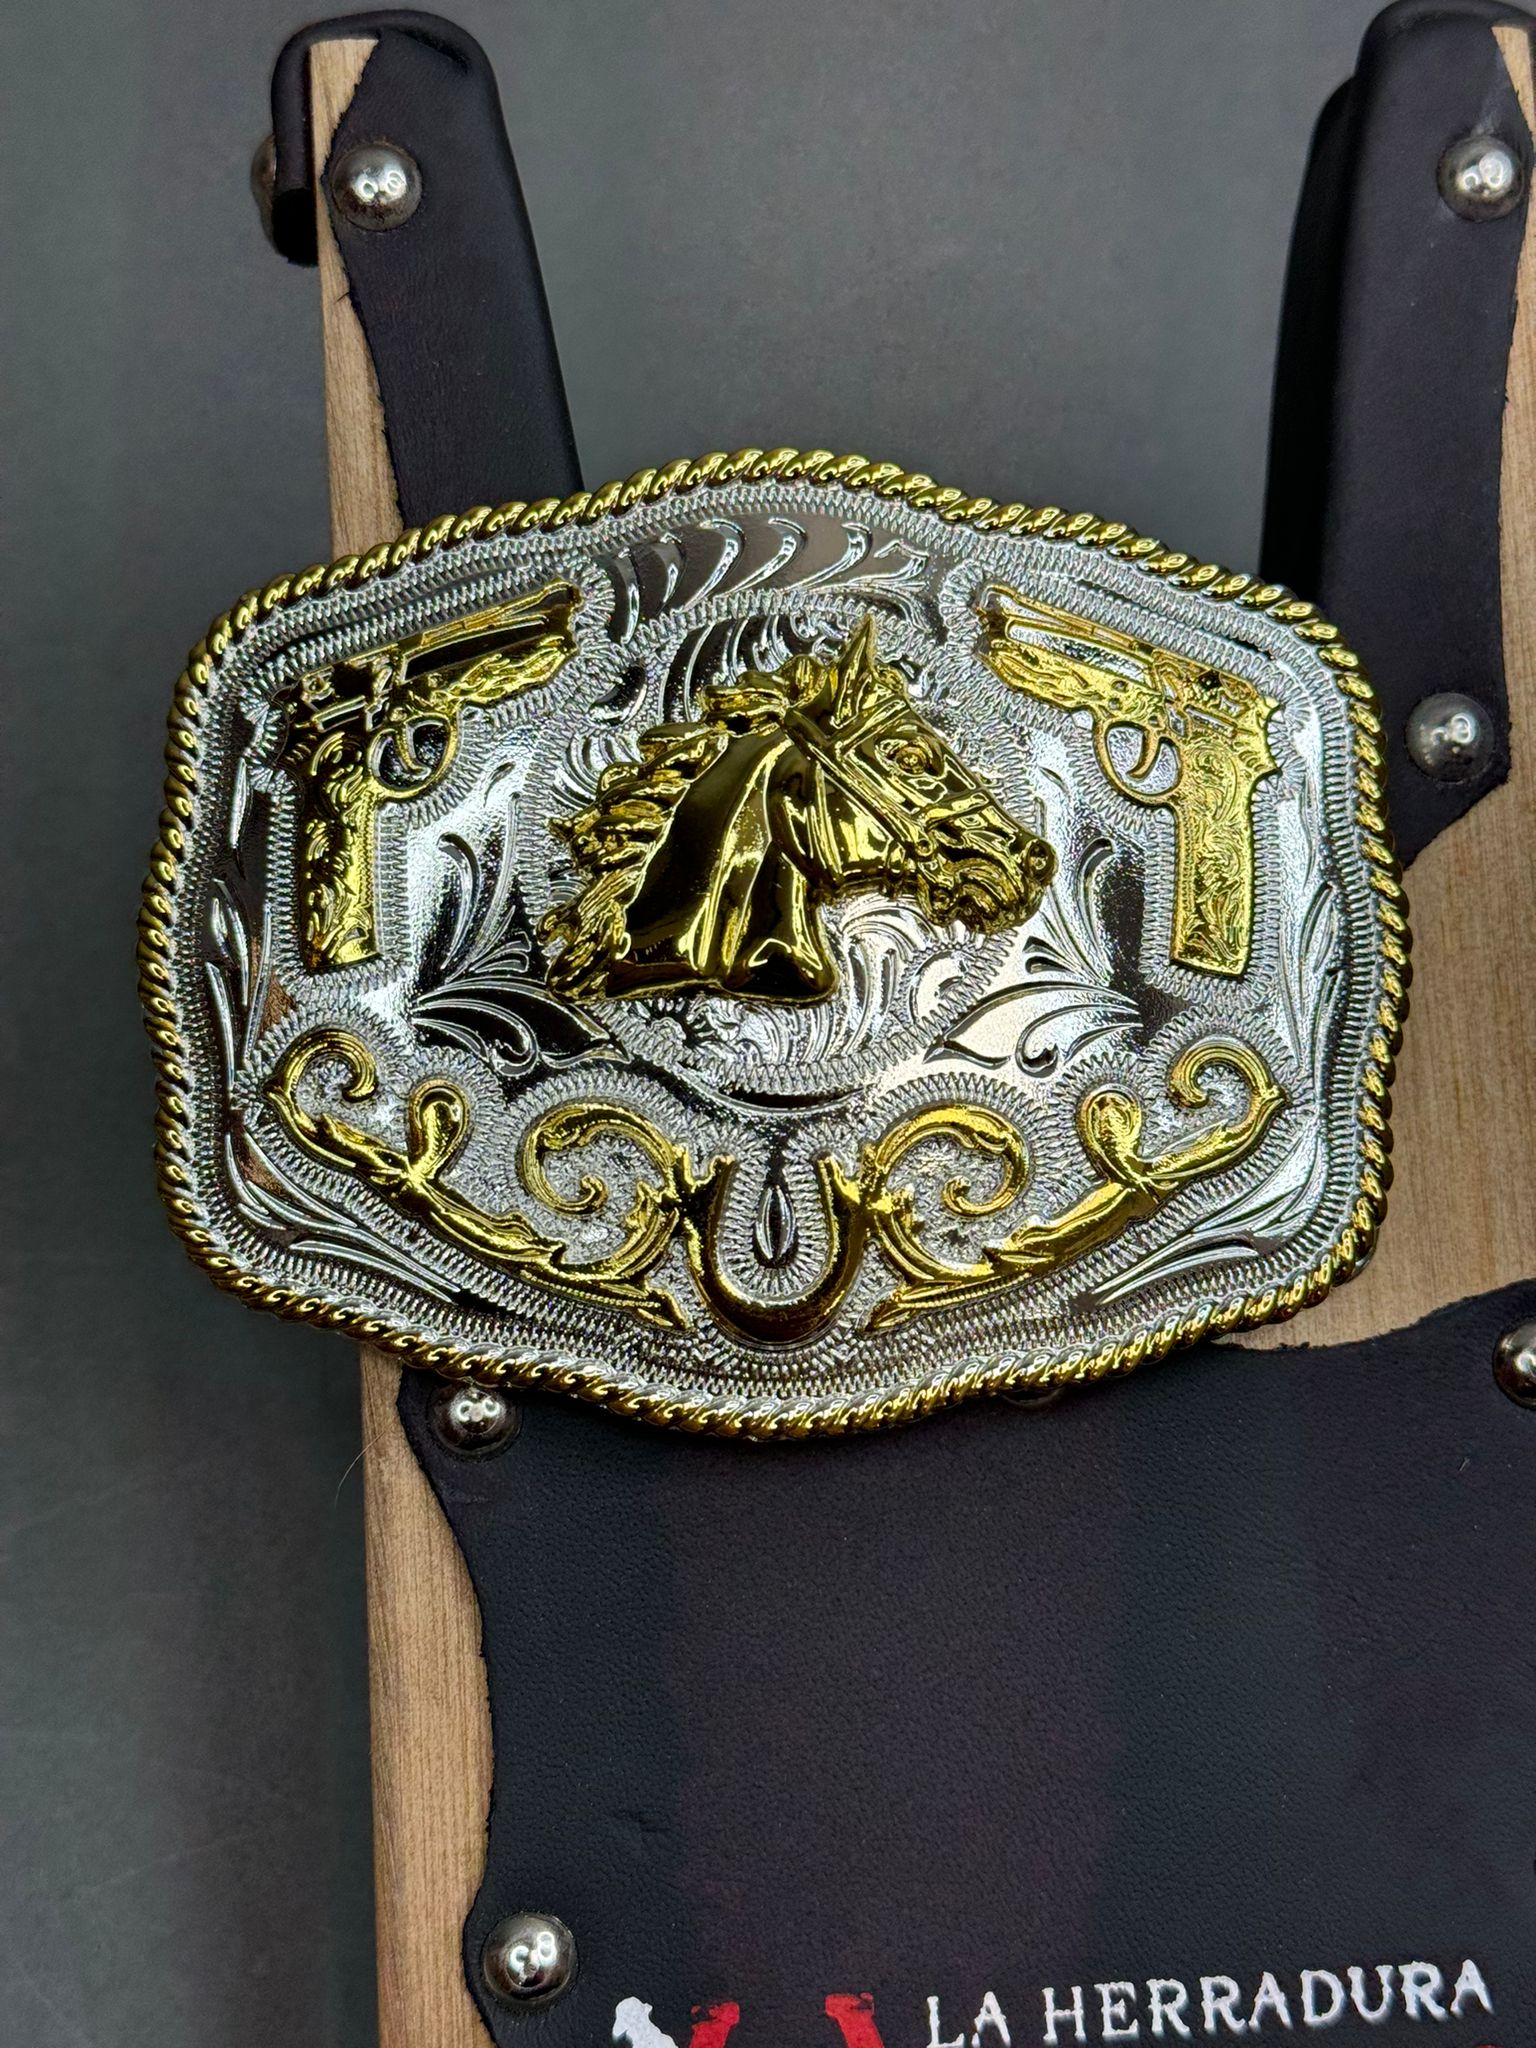 ROUNDED GOLD HORSE & TRIM DETAIL SILVER BUCKLE